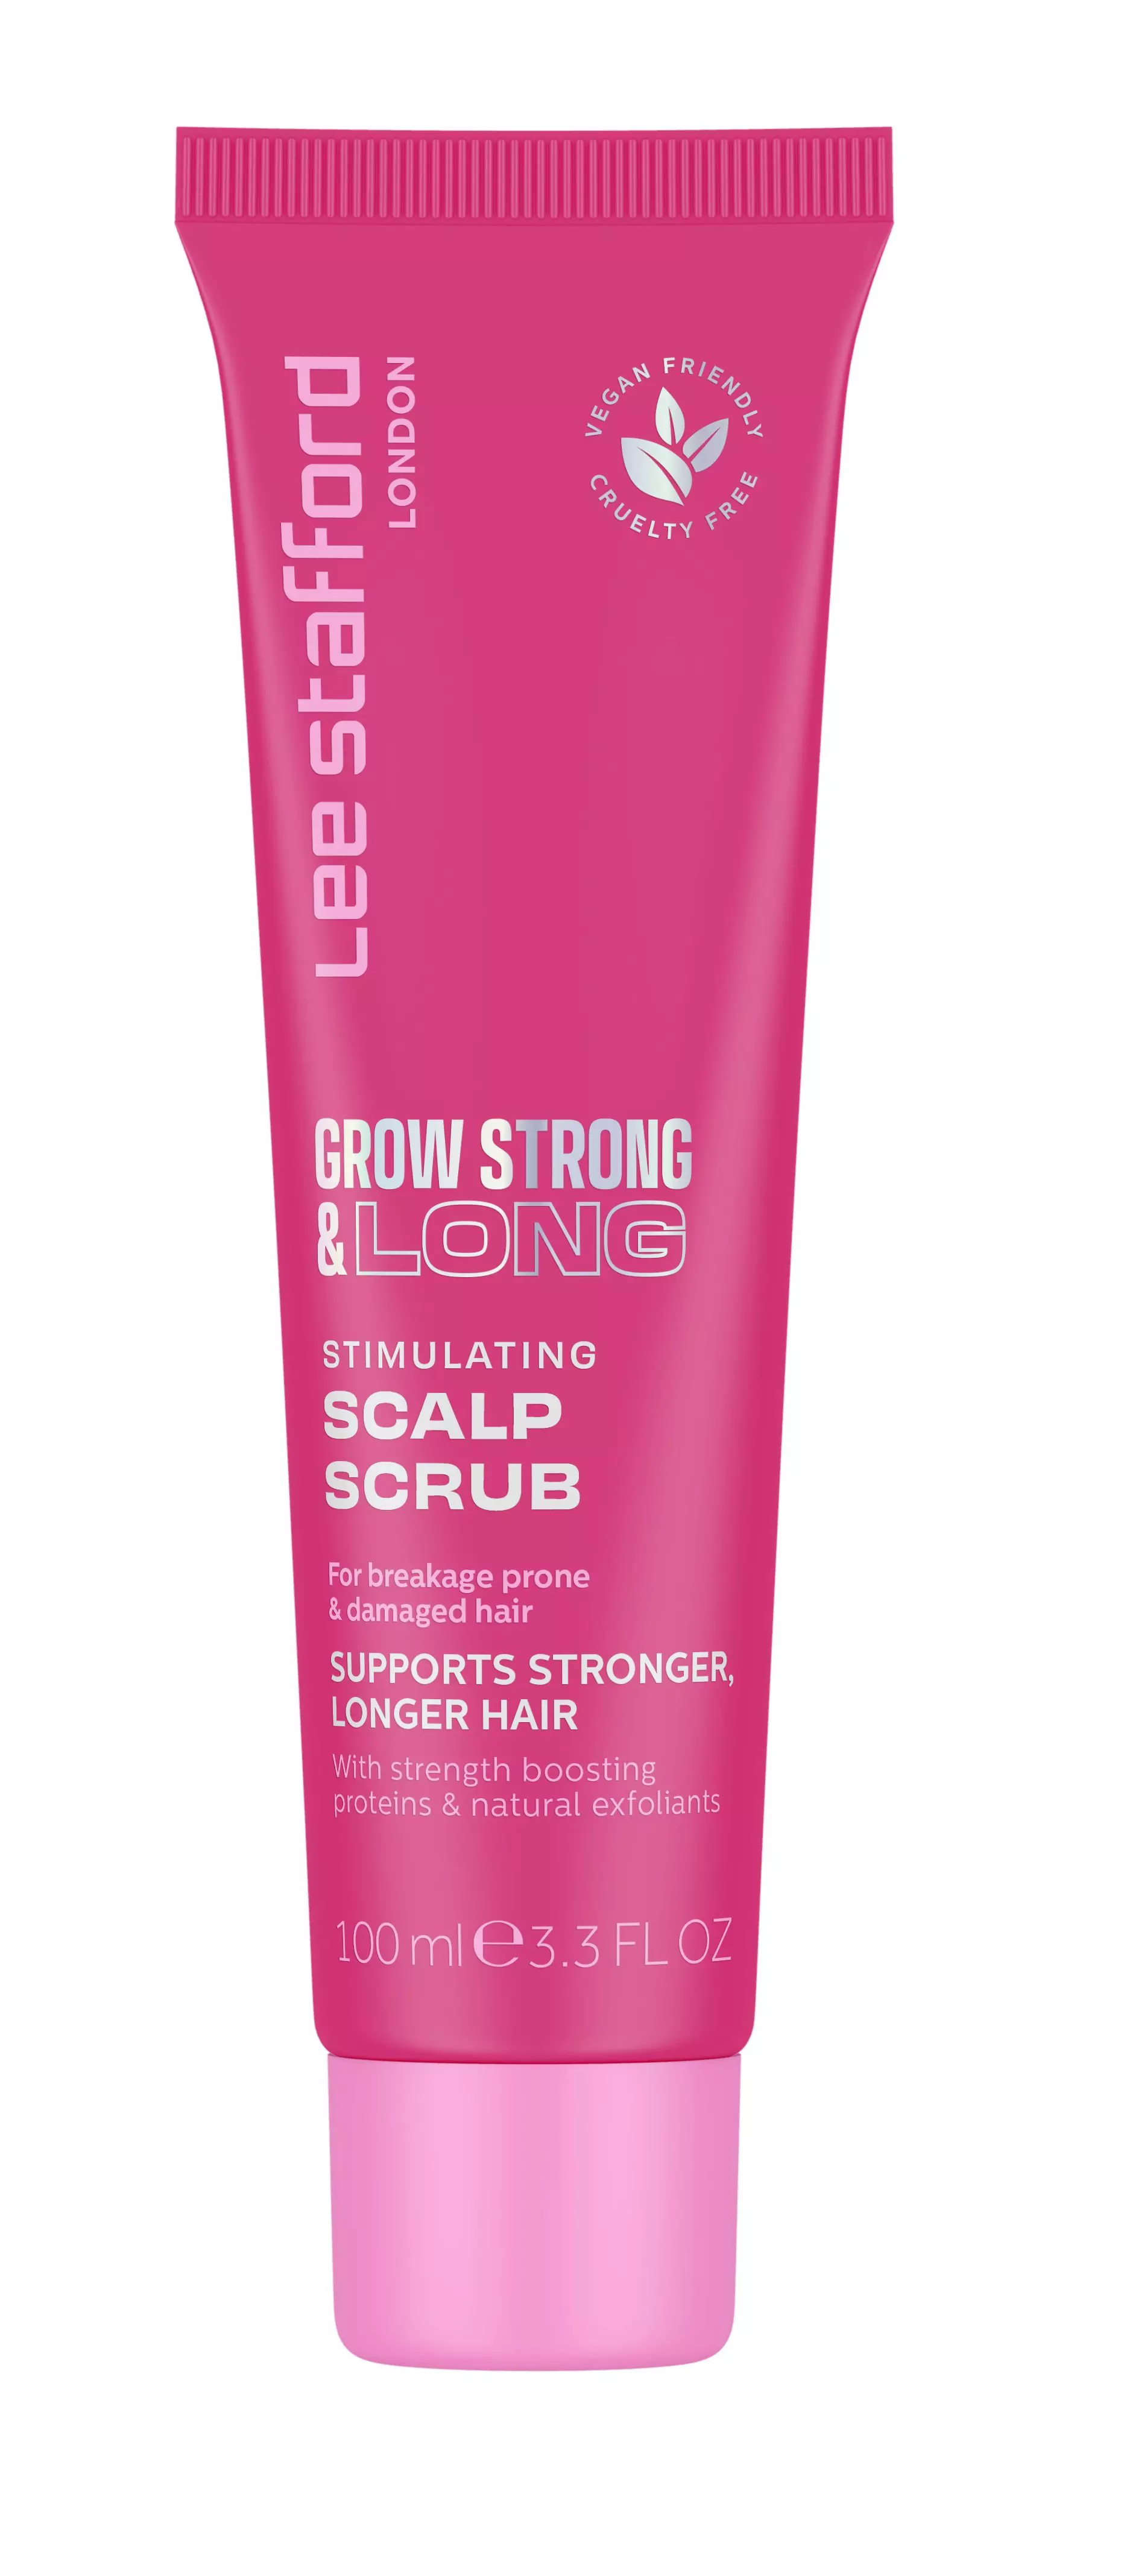 Lee Stafford Grow Stronglong Stimulating Scalp